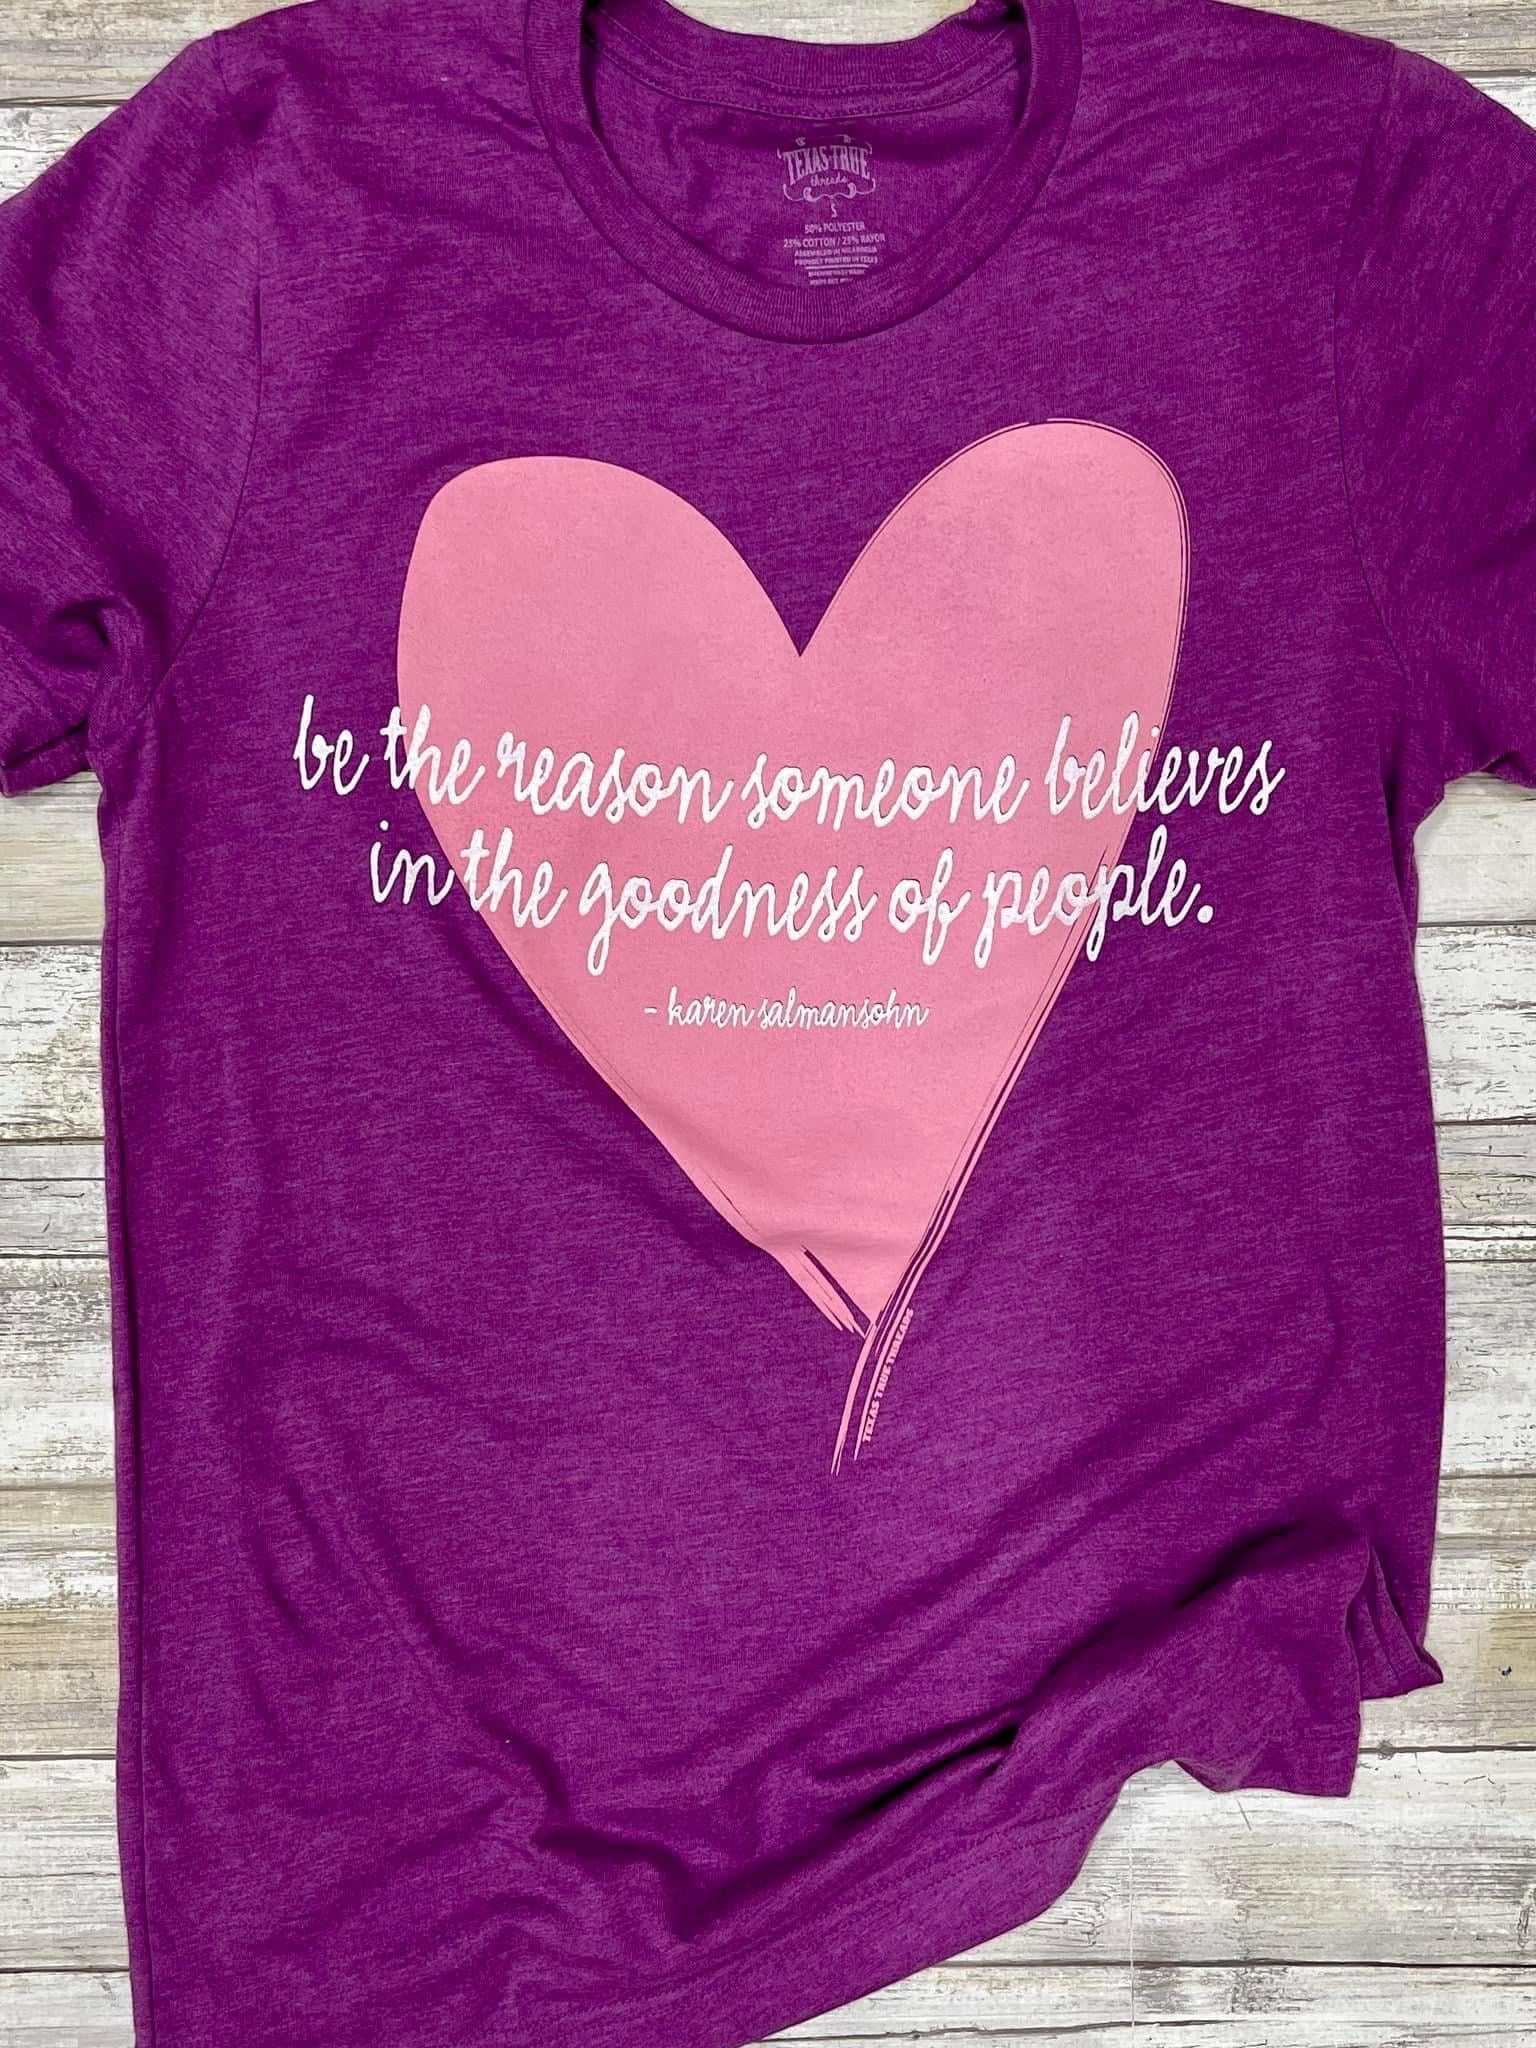 **PREORDER** BE THE REASON TEE